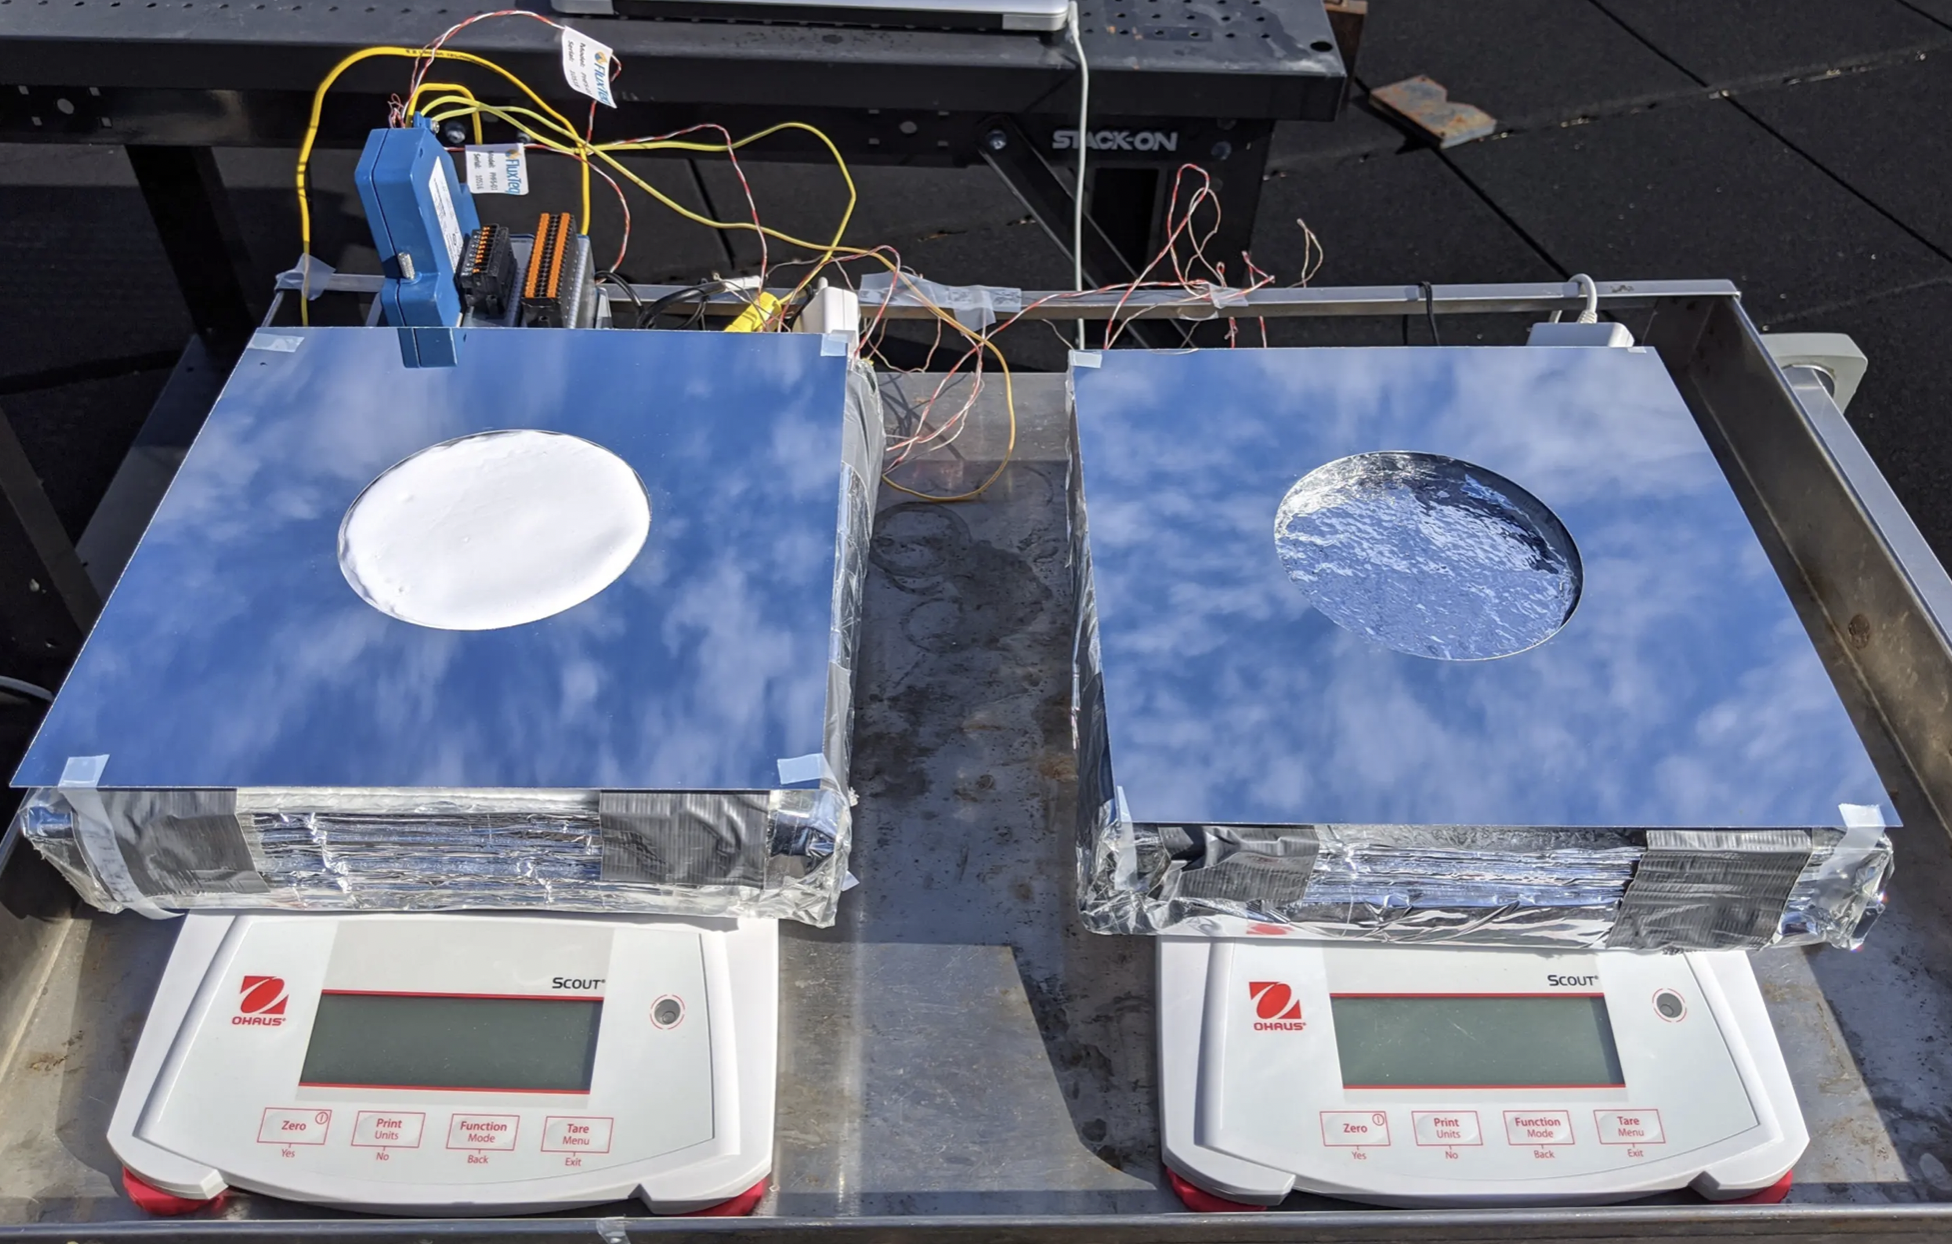 This cooling system does not require electricity!  MIT engineers anticipate a revolution